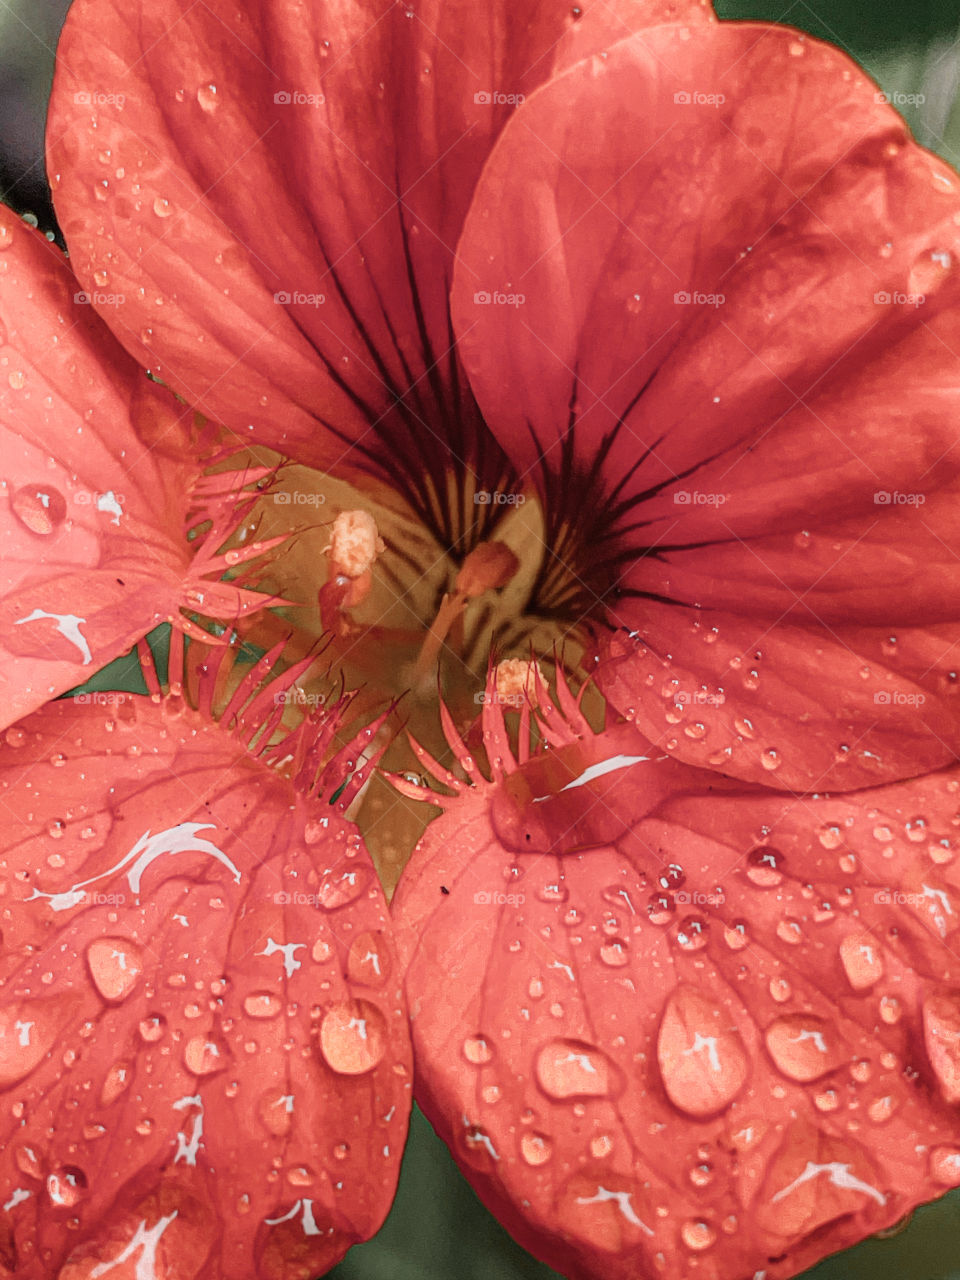 Close up pedals flower flowers leaf rainfall green raindrops waterdrops droplets wet water rain drop outside nature outdoors elements dew dewdrops plant plants leafs Grass splashes phone photography pink